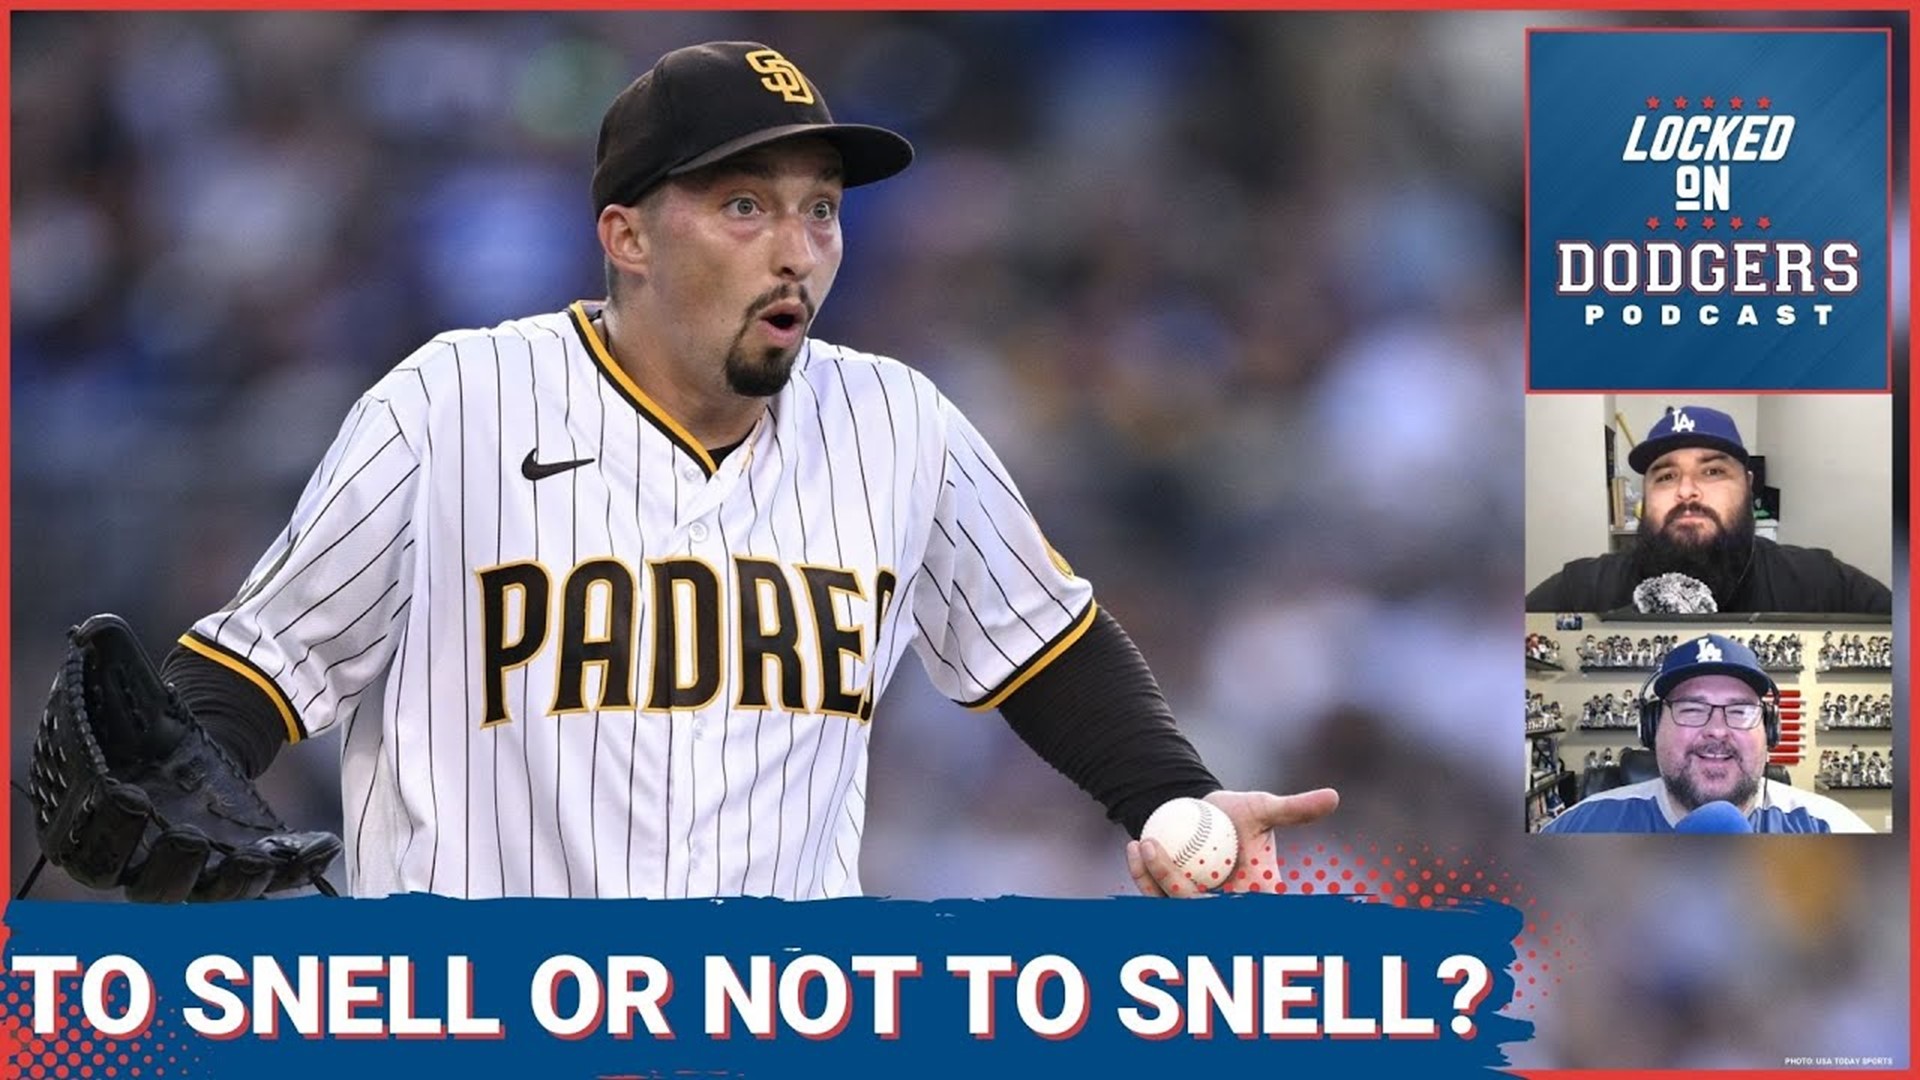 Blake Snell won the NL Cy Young award and is now a free agent. Should the Dodgers take a look at signing the left-hander?